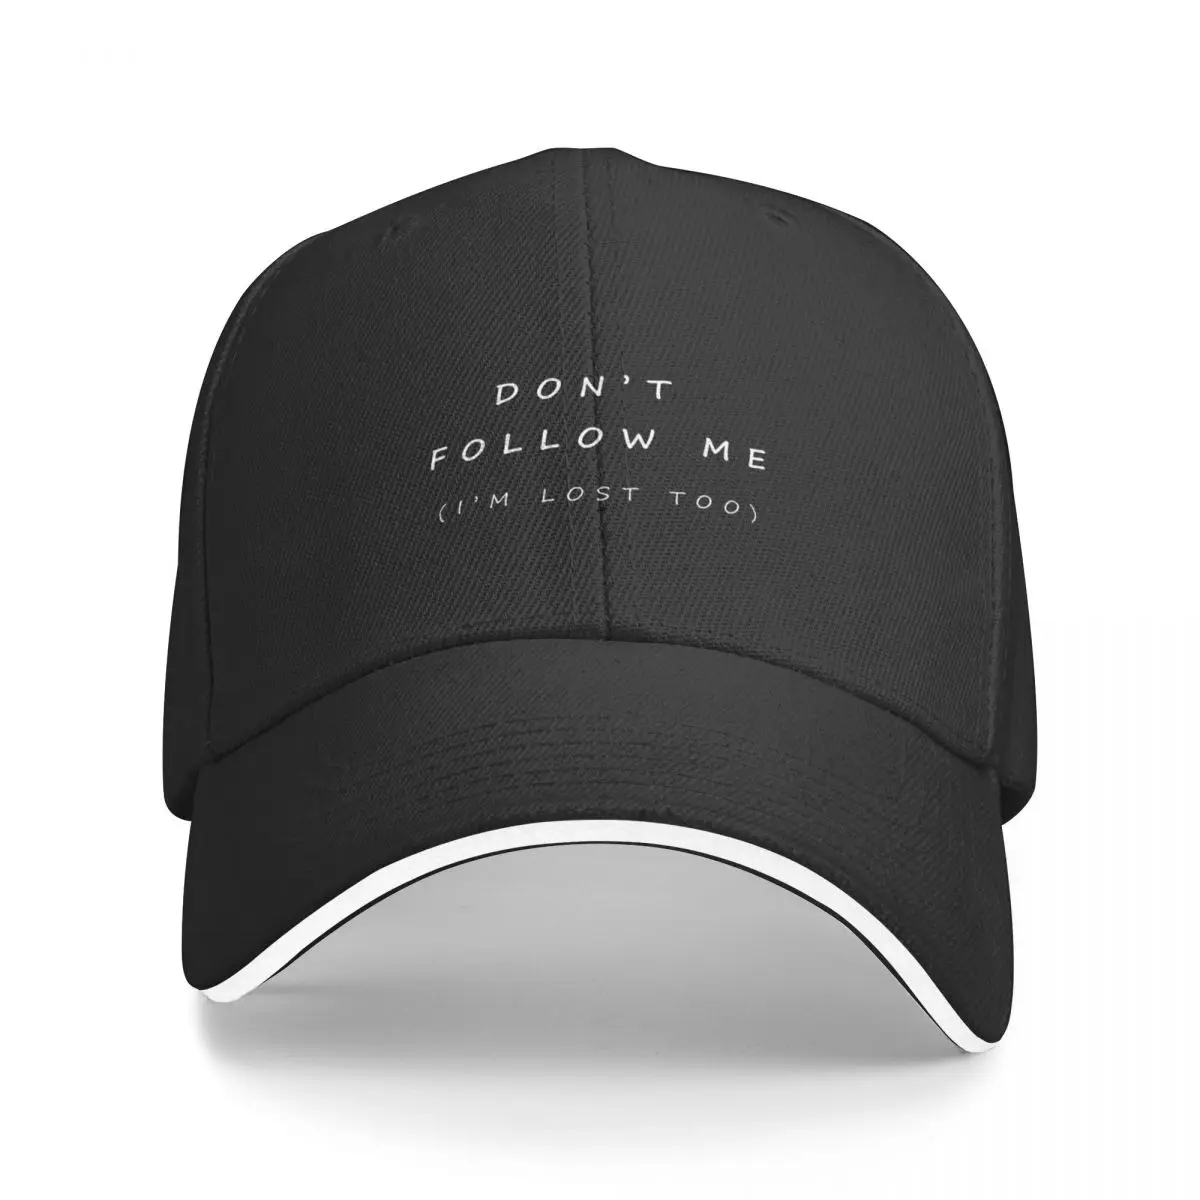 

Don't Follow me (i'm lost too) Baseball Cap Sports Cap Anime Hat Beach Outing For Women Men's